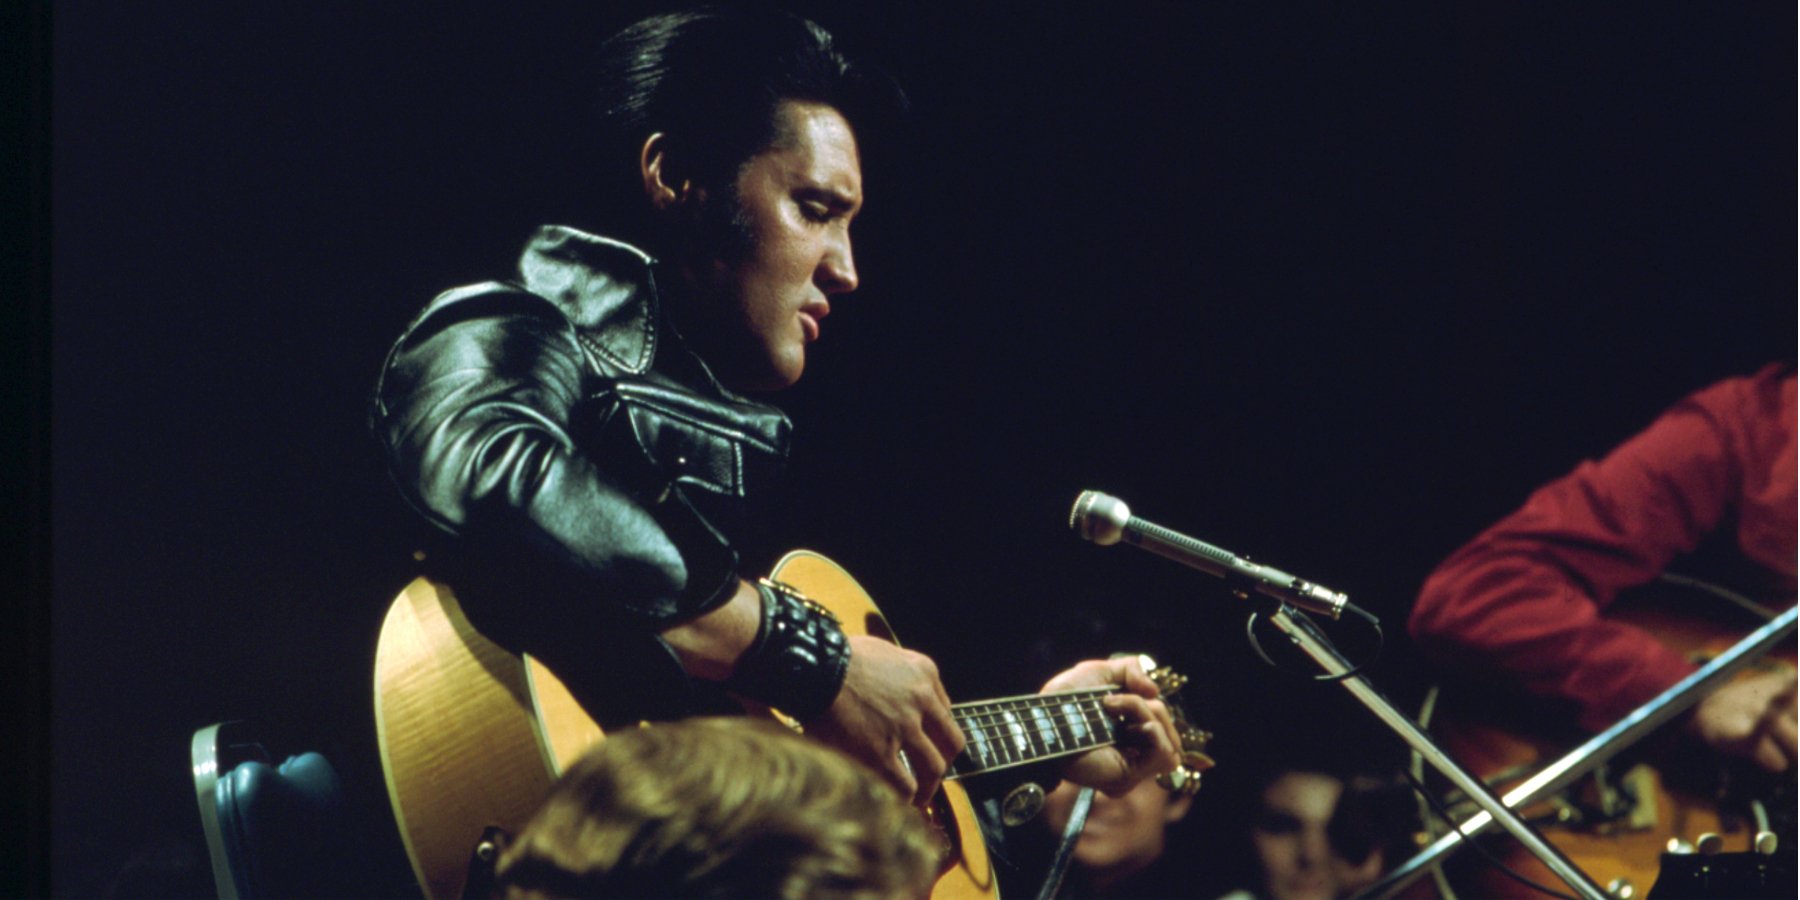 Elvis Presley photographed during the 1968 comeback special.